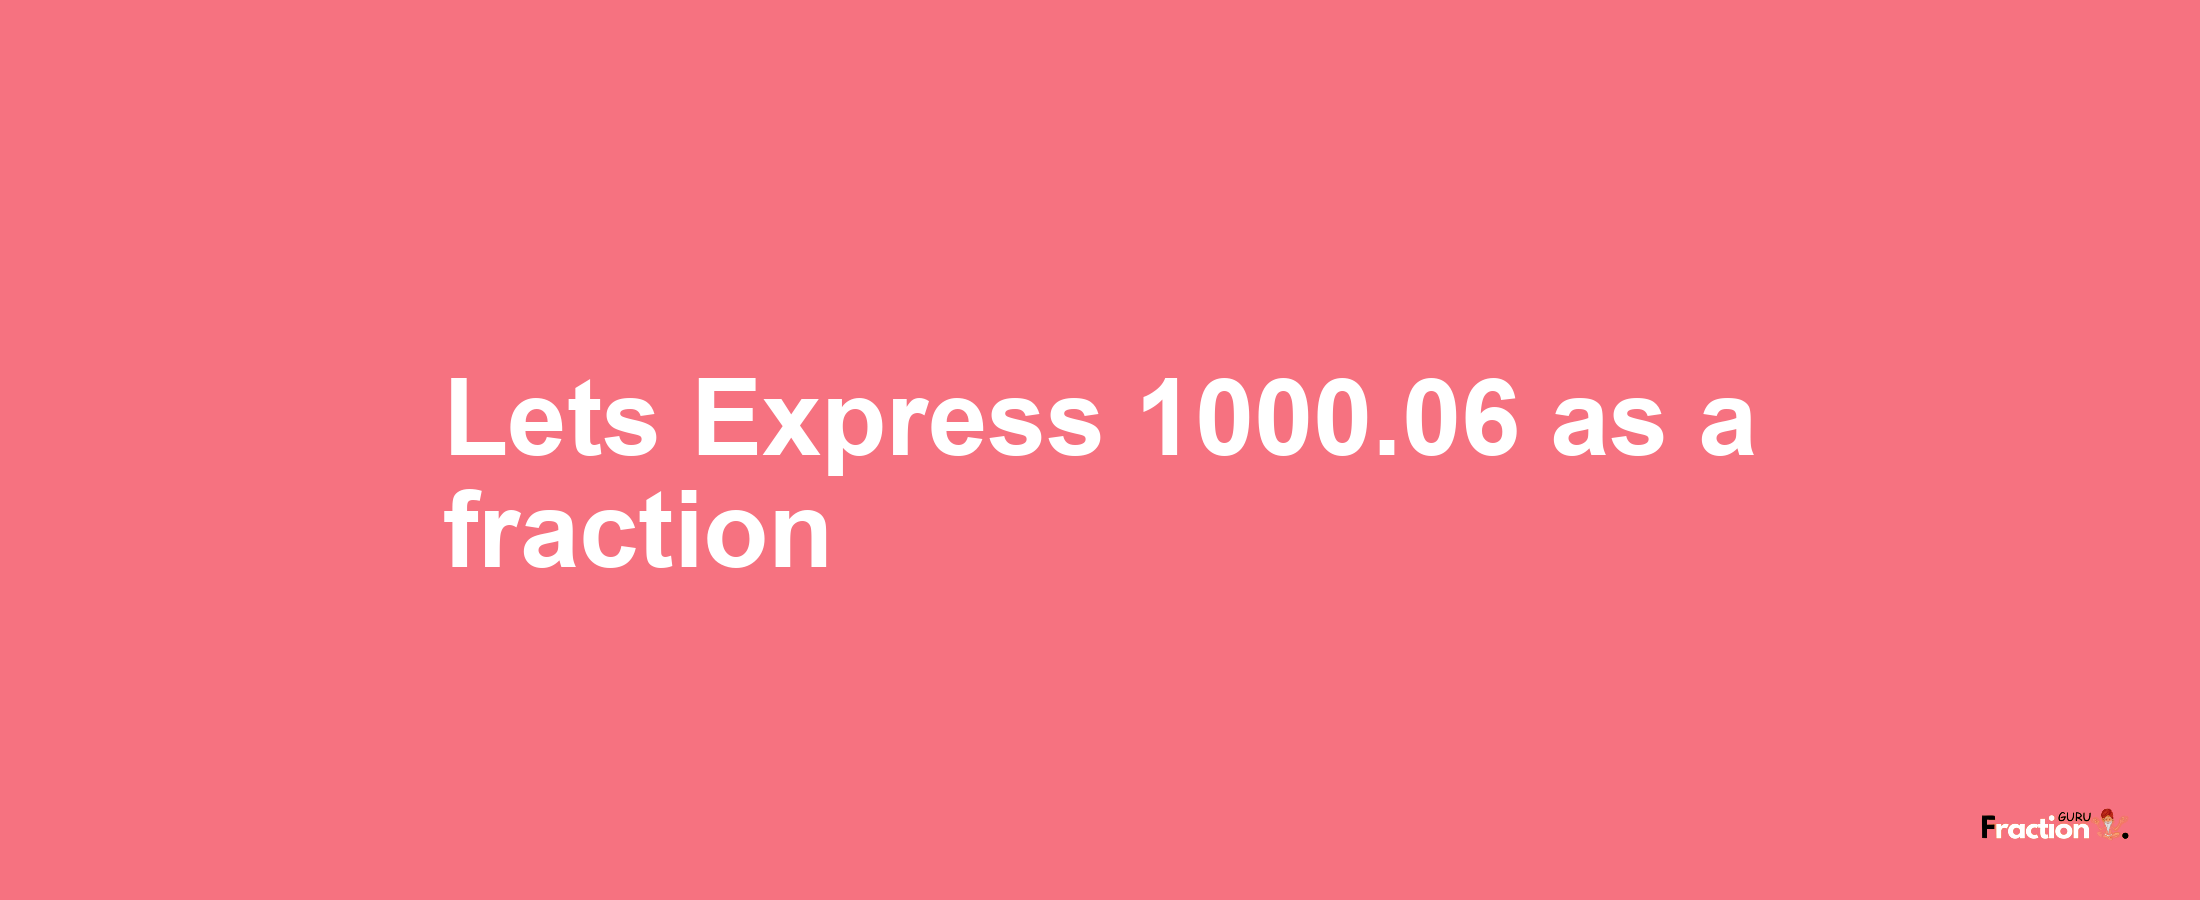 Lets Express 1000.06 as afraction